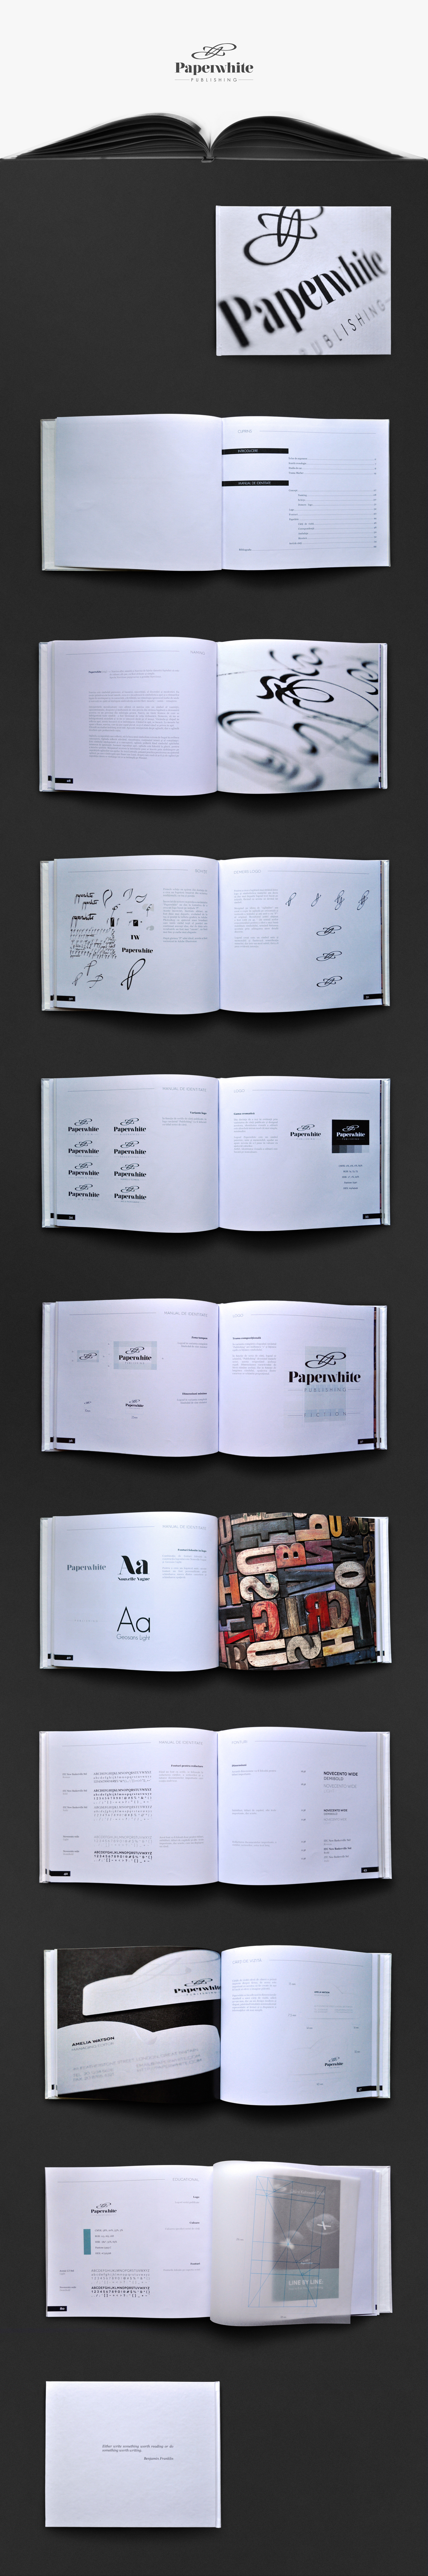 publishing   Style Guide visual identity Layout book editorial print